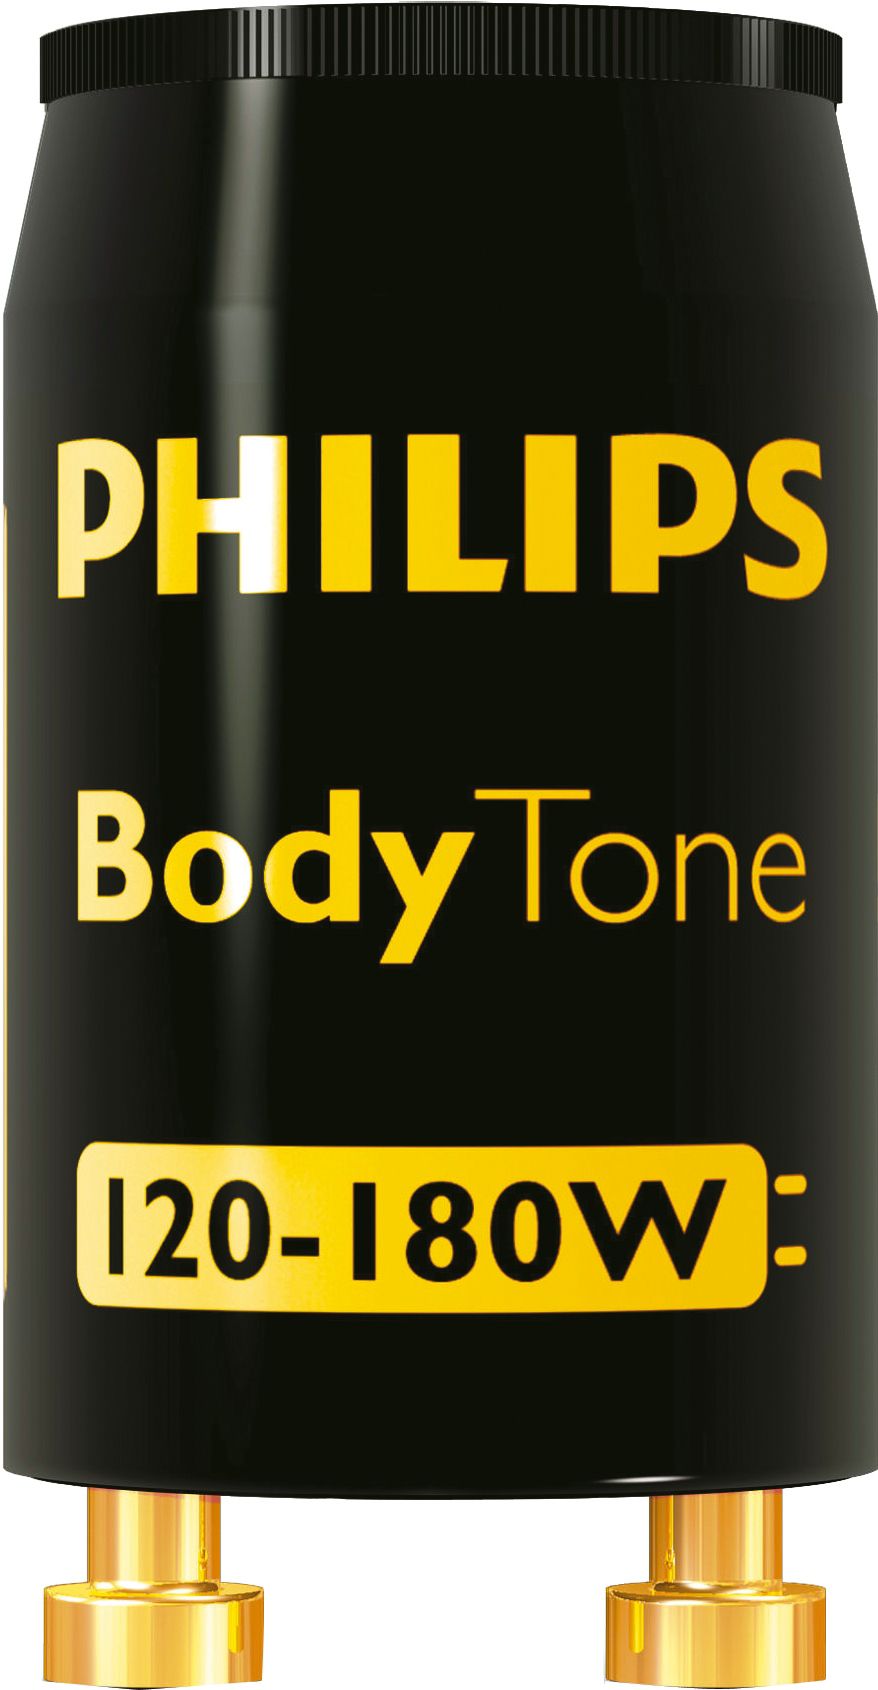 SUNBED STARTERS PHILIPS BODY TONE 120w-180w FOR HIGH POWER TANNING LAMPS TUBES